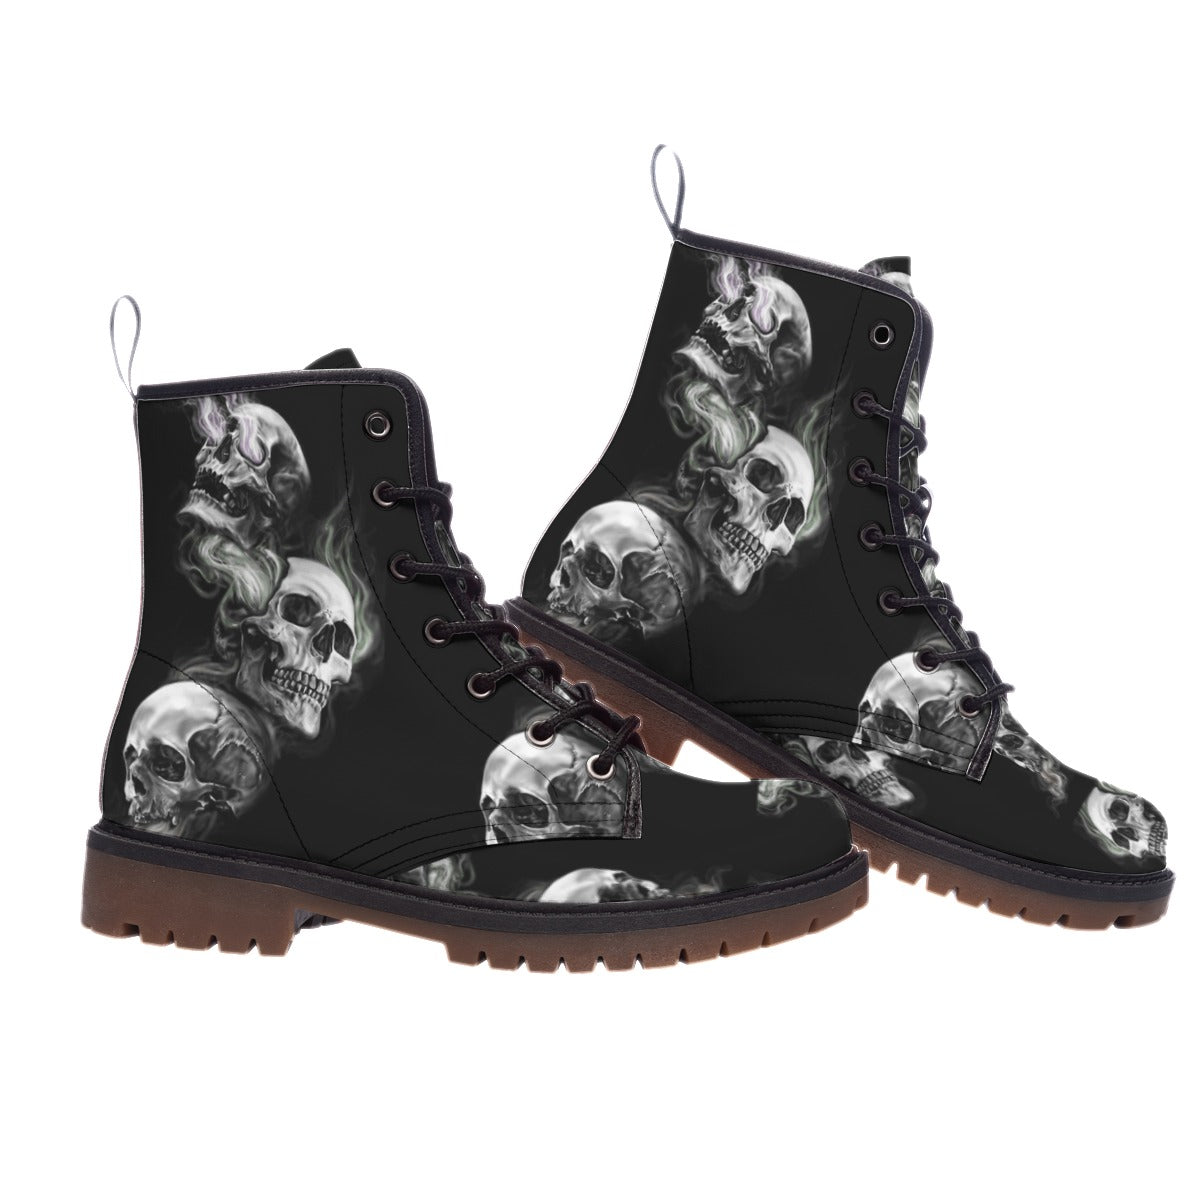 Flaming skull boots shoes for men women, Fire gothic Halloween boots shoes